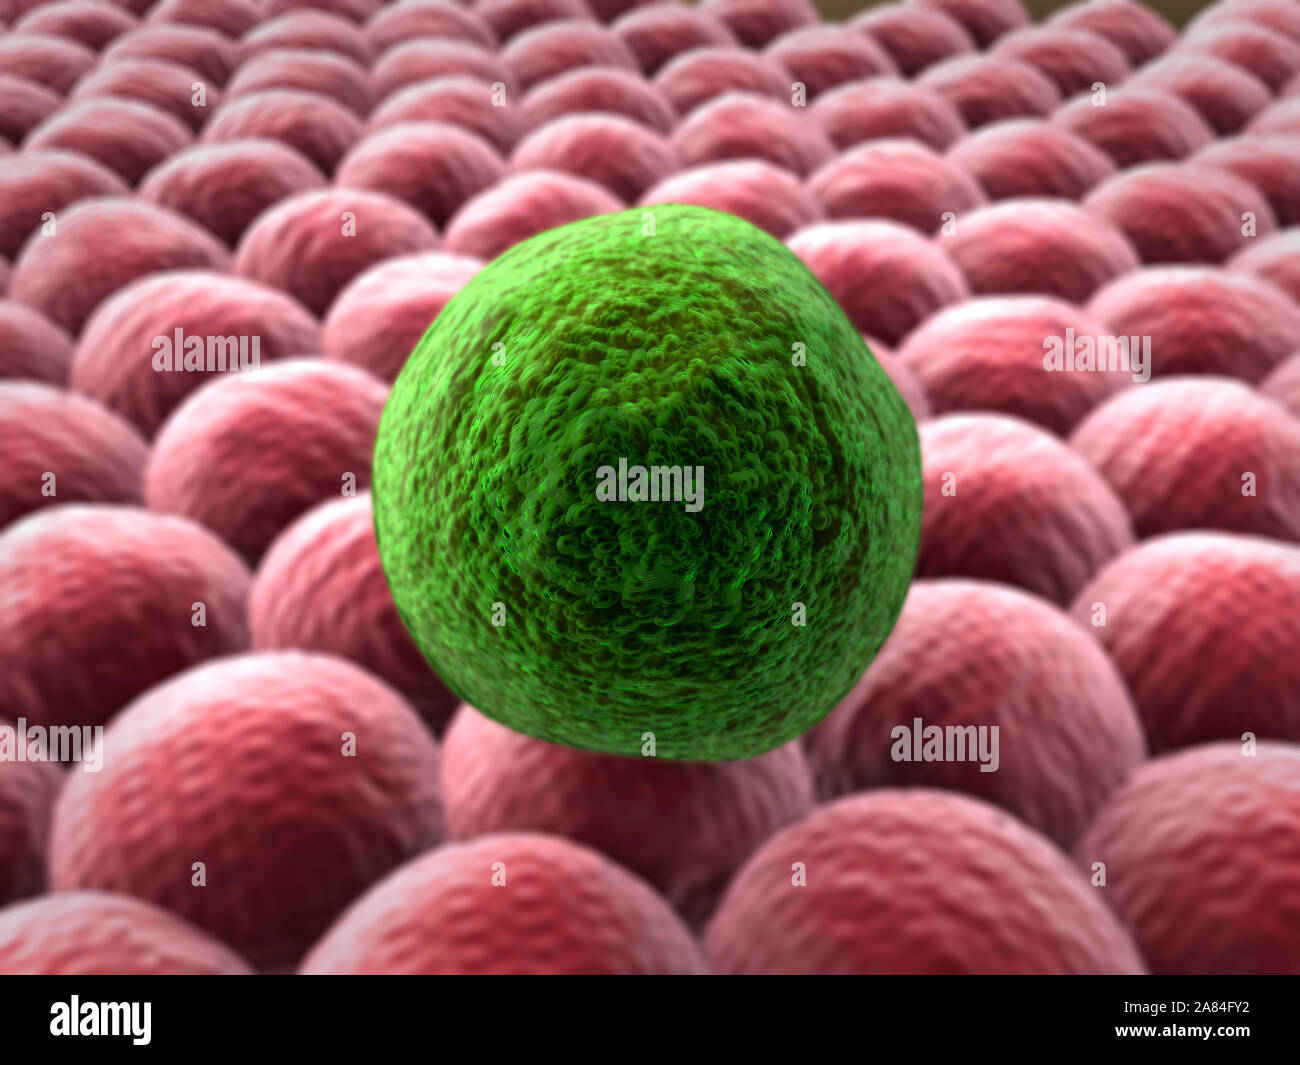 image of cancer cells, 3d rendered cancer cell, Clusters of infected cells Stock Photo